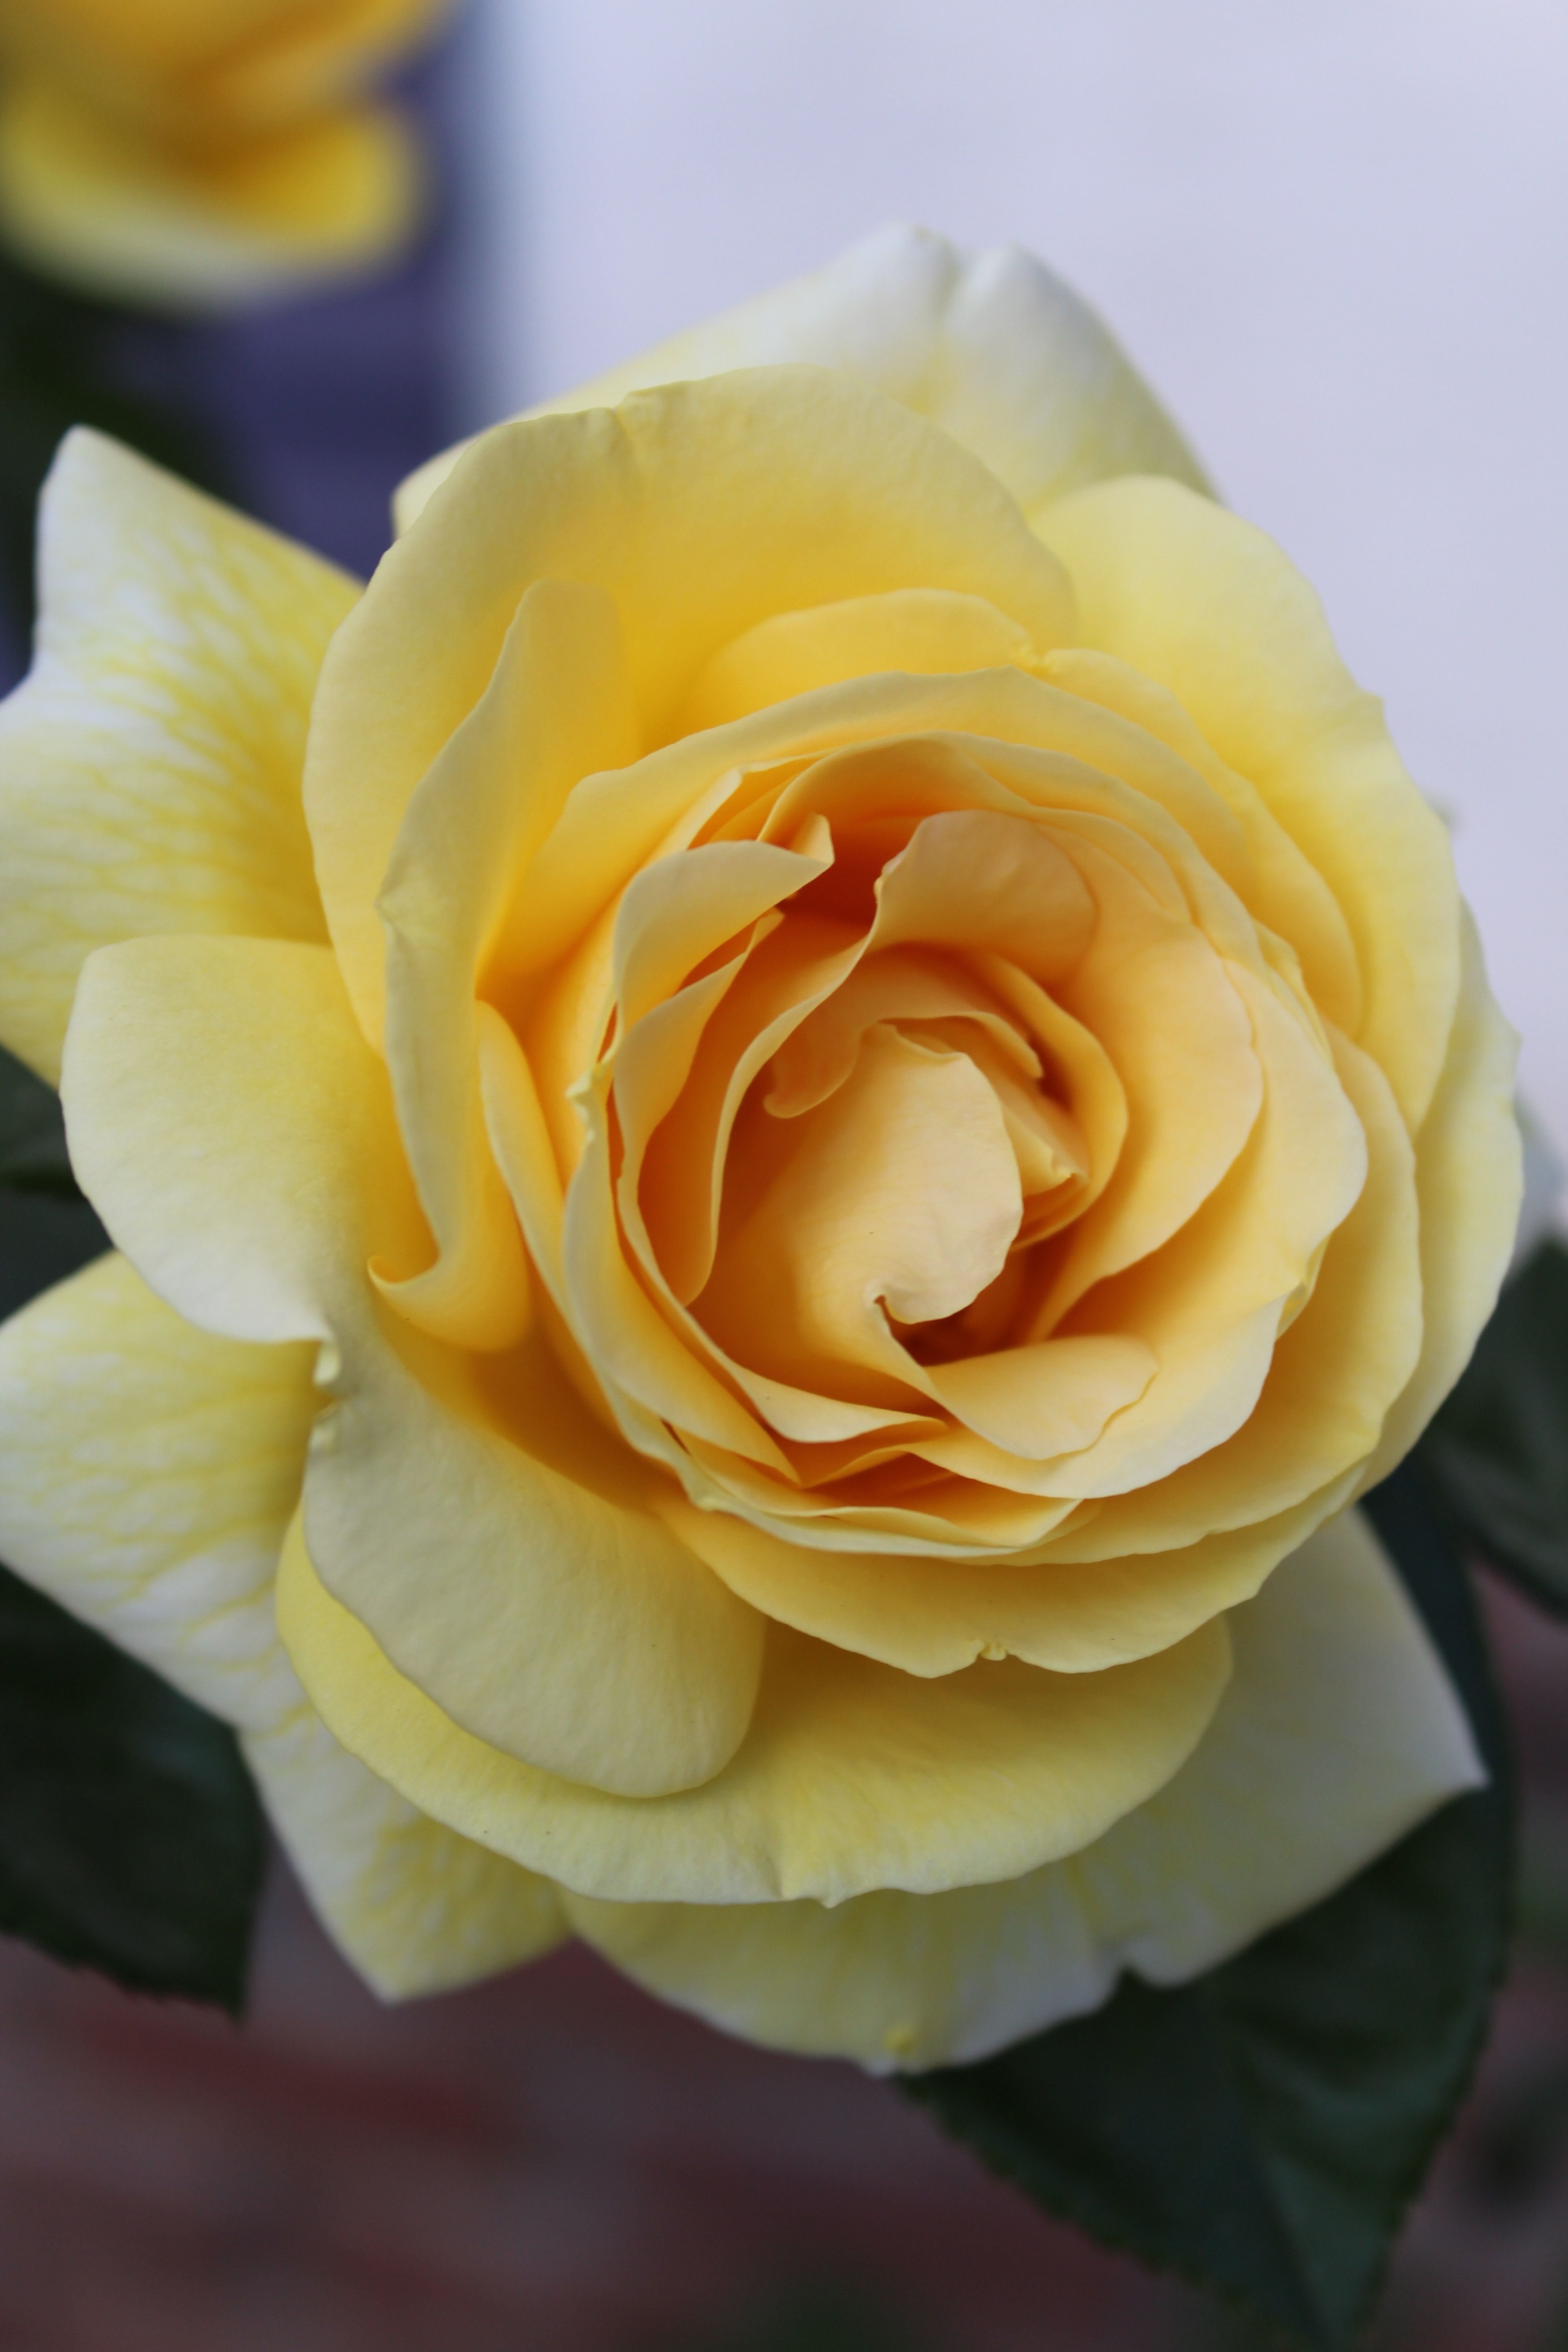 Yellow rose flower in close-up photography